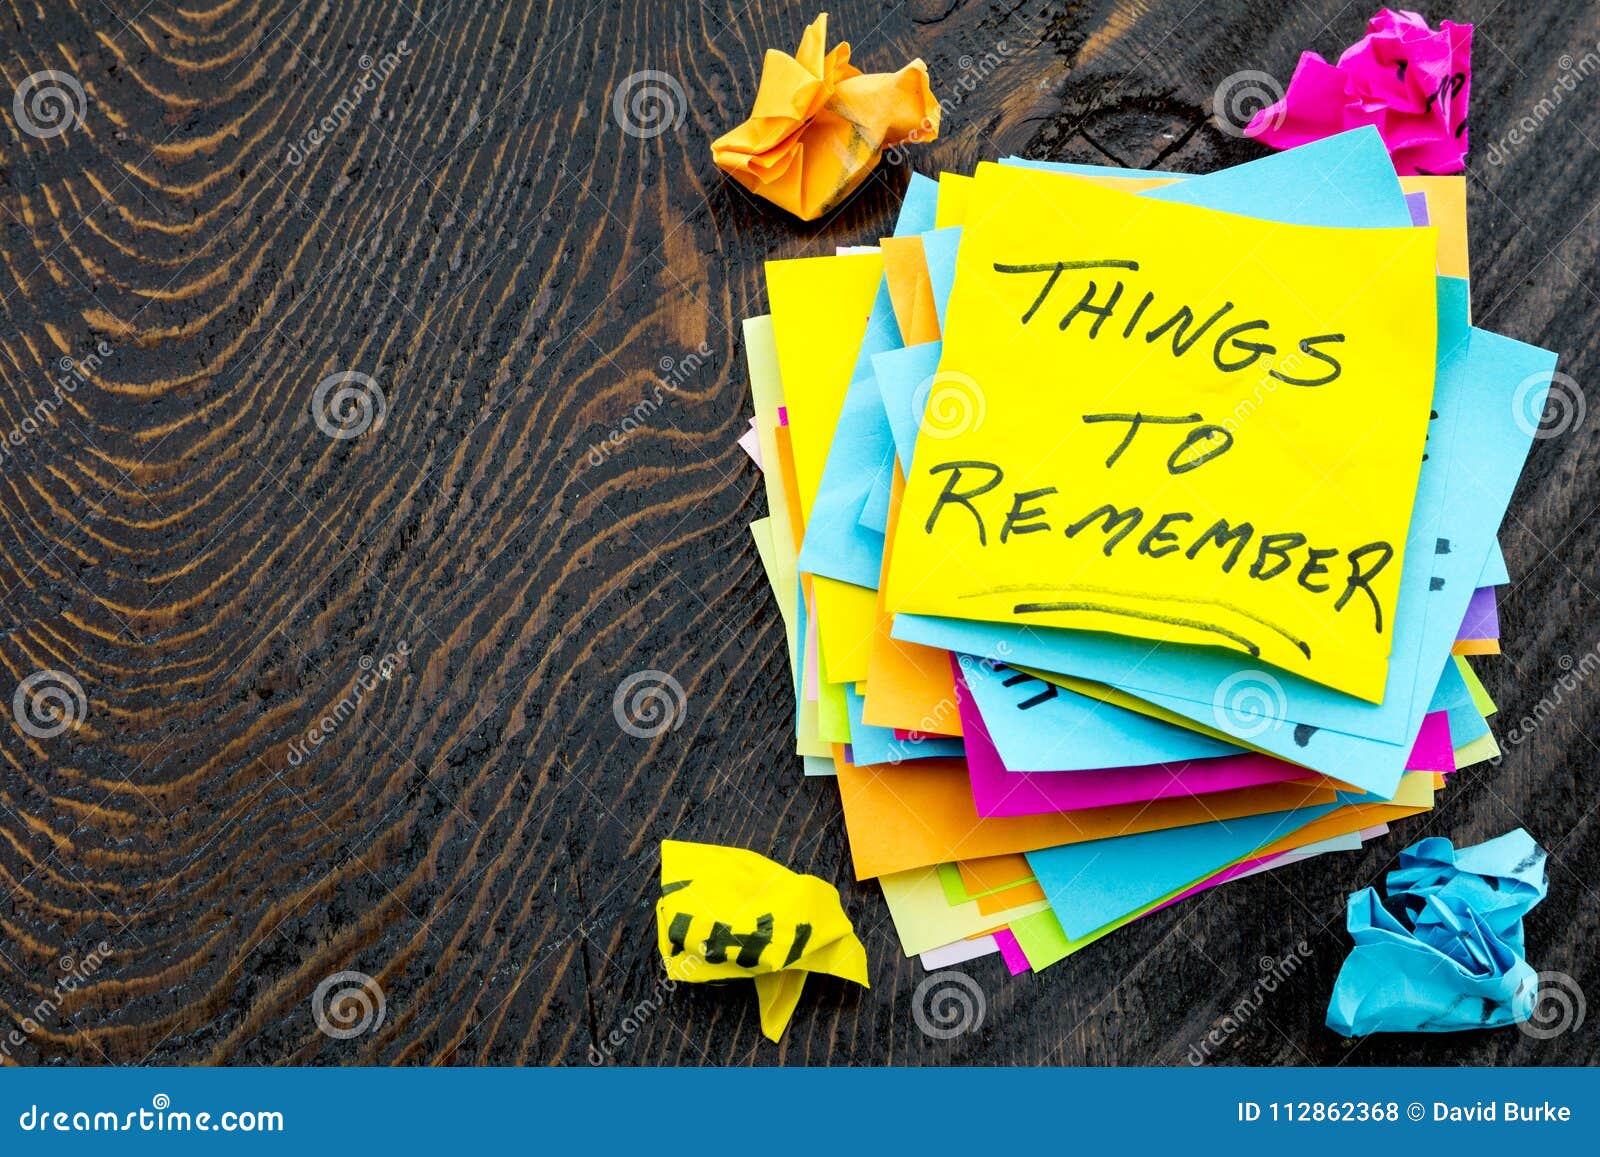 remember sticky notes message daily reminder activity stack memory note